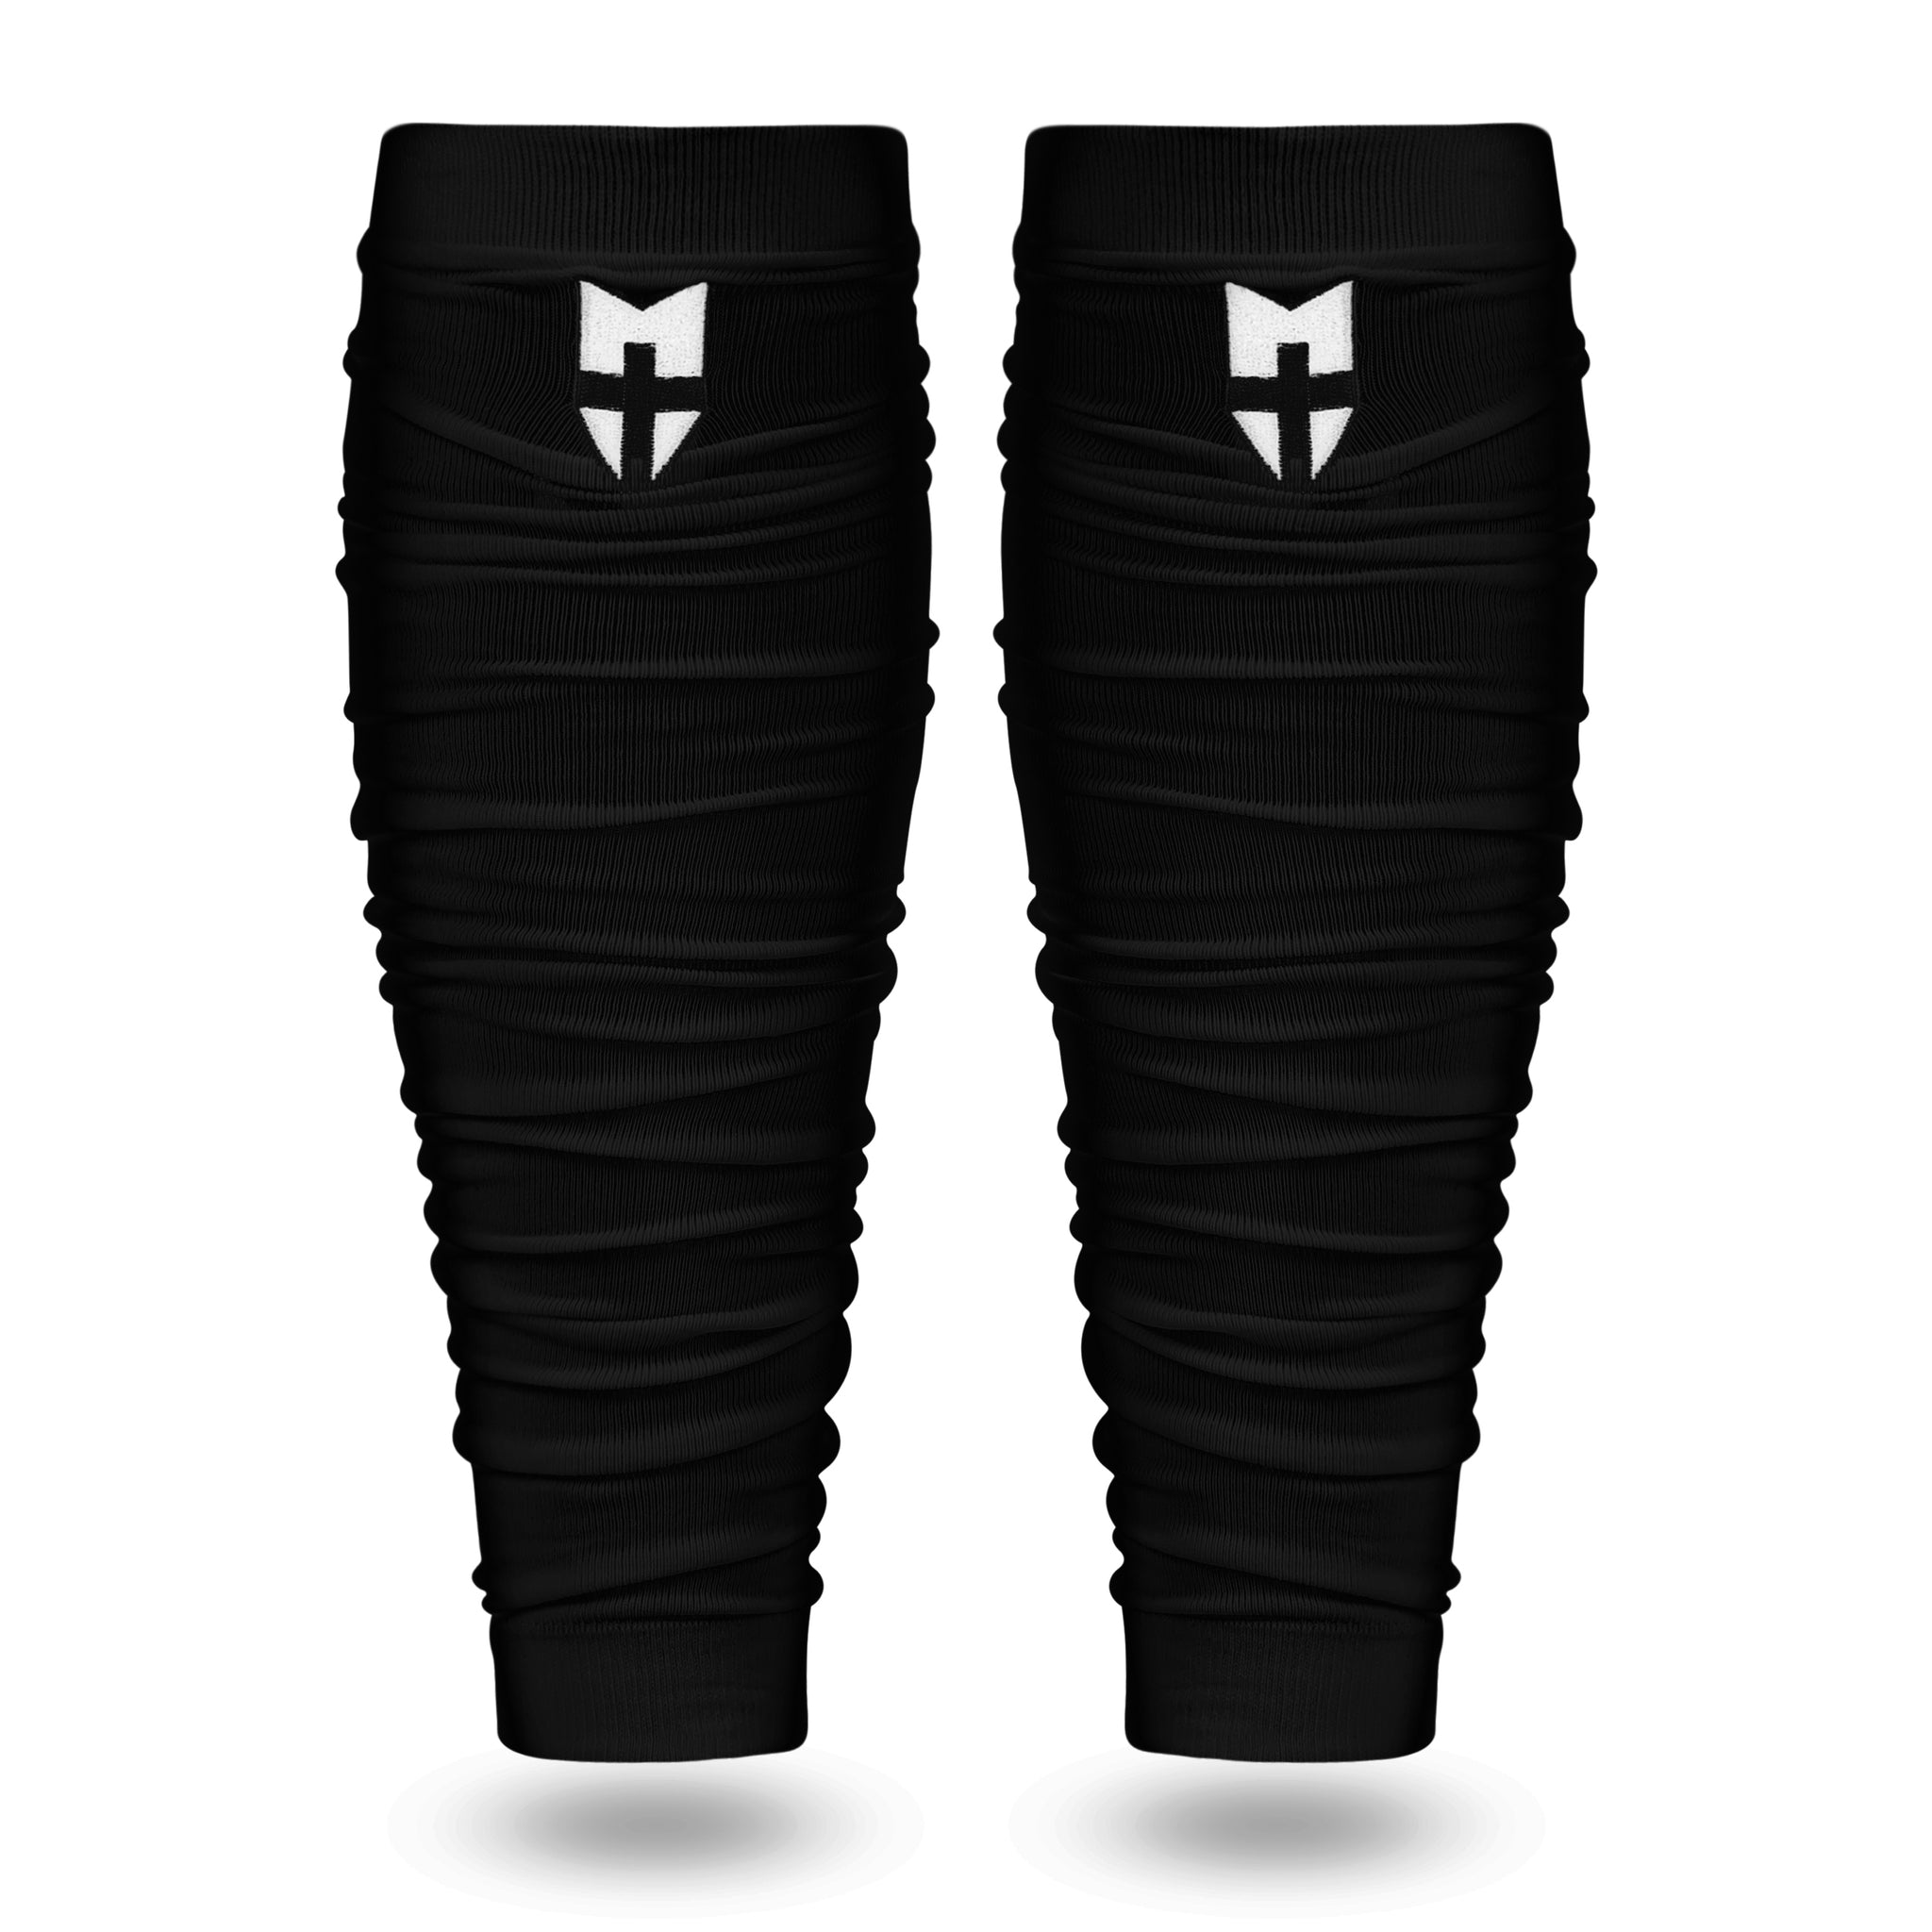  Yxmeiguo Football Leg Sleeves Men, Calf Compression Sleeve for  Men Women, Leg Sleeves for Men Football, Football Socks Running Sports  Football Accessories for Adult Athletes, Black : Clothing, Shoes & Jewelry